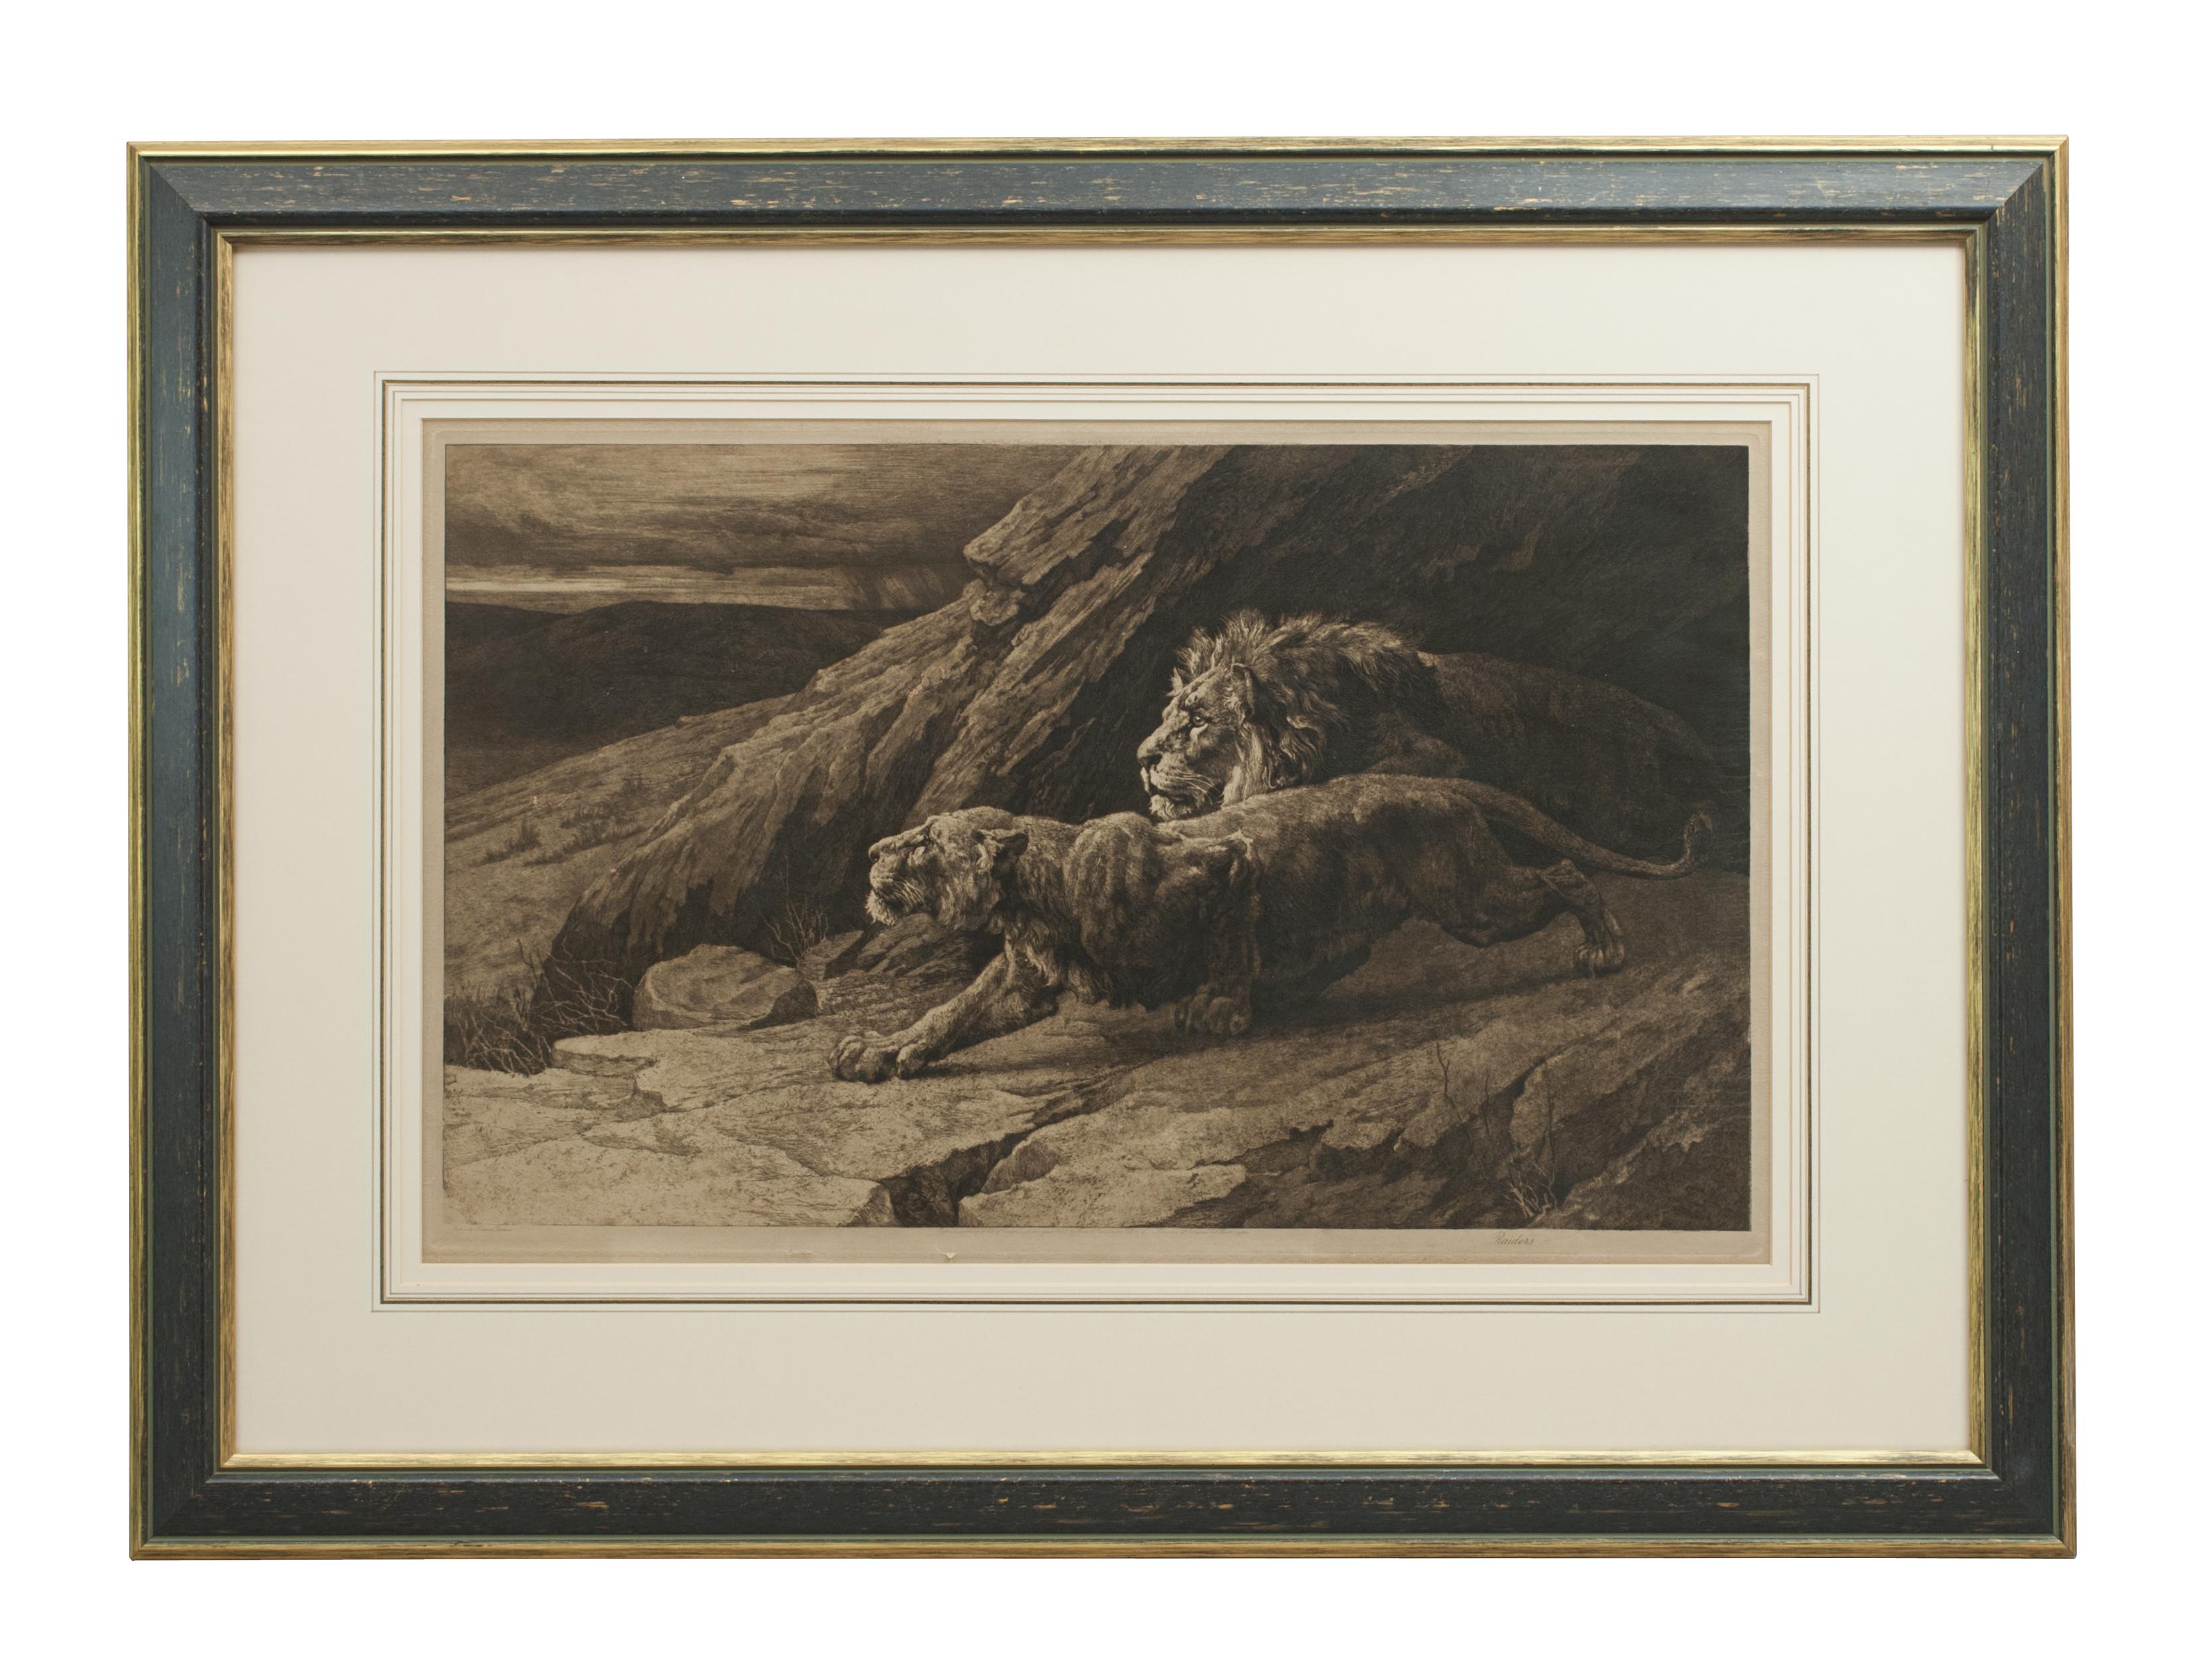 Raiders by Herbert Dicksee.
A framed wildlife etching of a pair of African lions by Herbert Dicksee. The picture shows a pair of crouching lions between some rocks overlooking the valley below. Published October 1st, 1898 by Frost & Reed and is